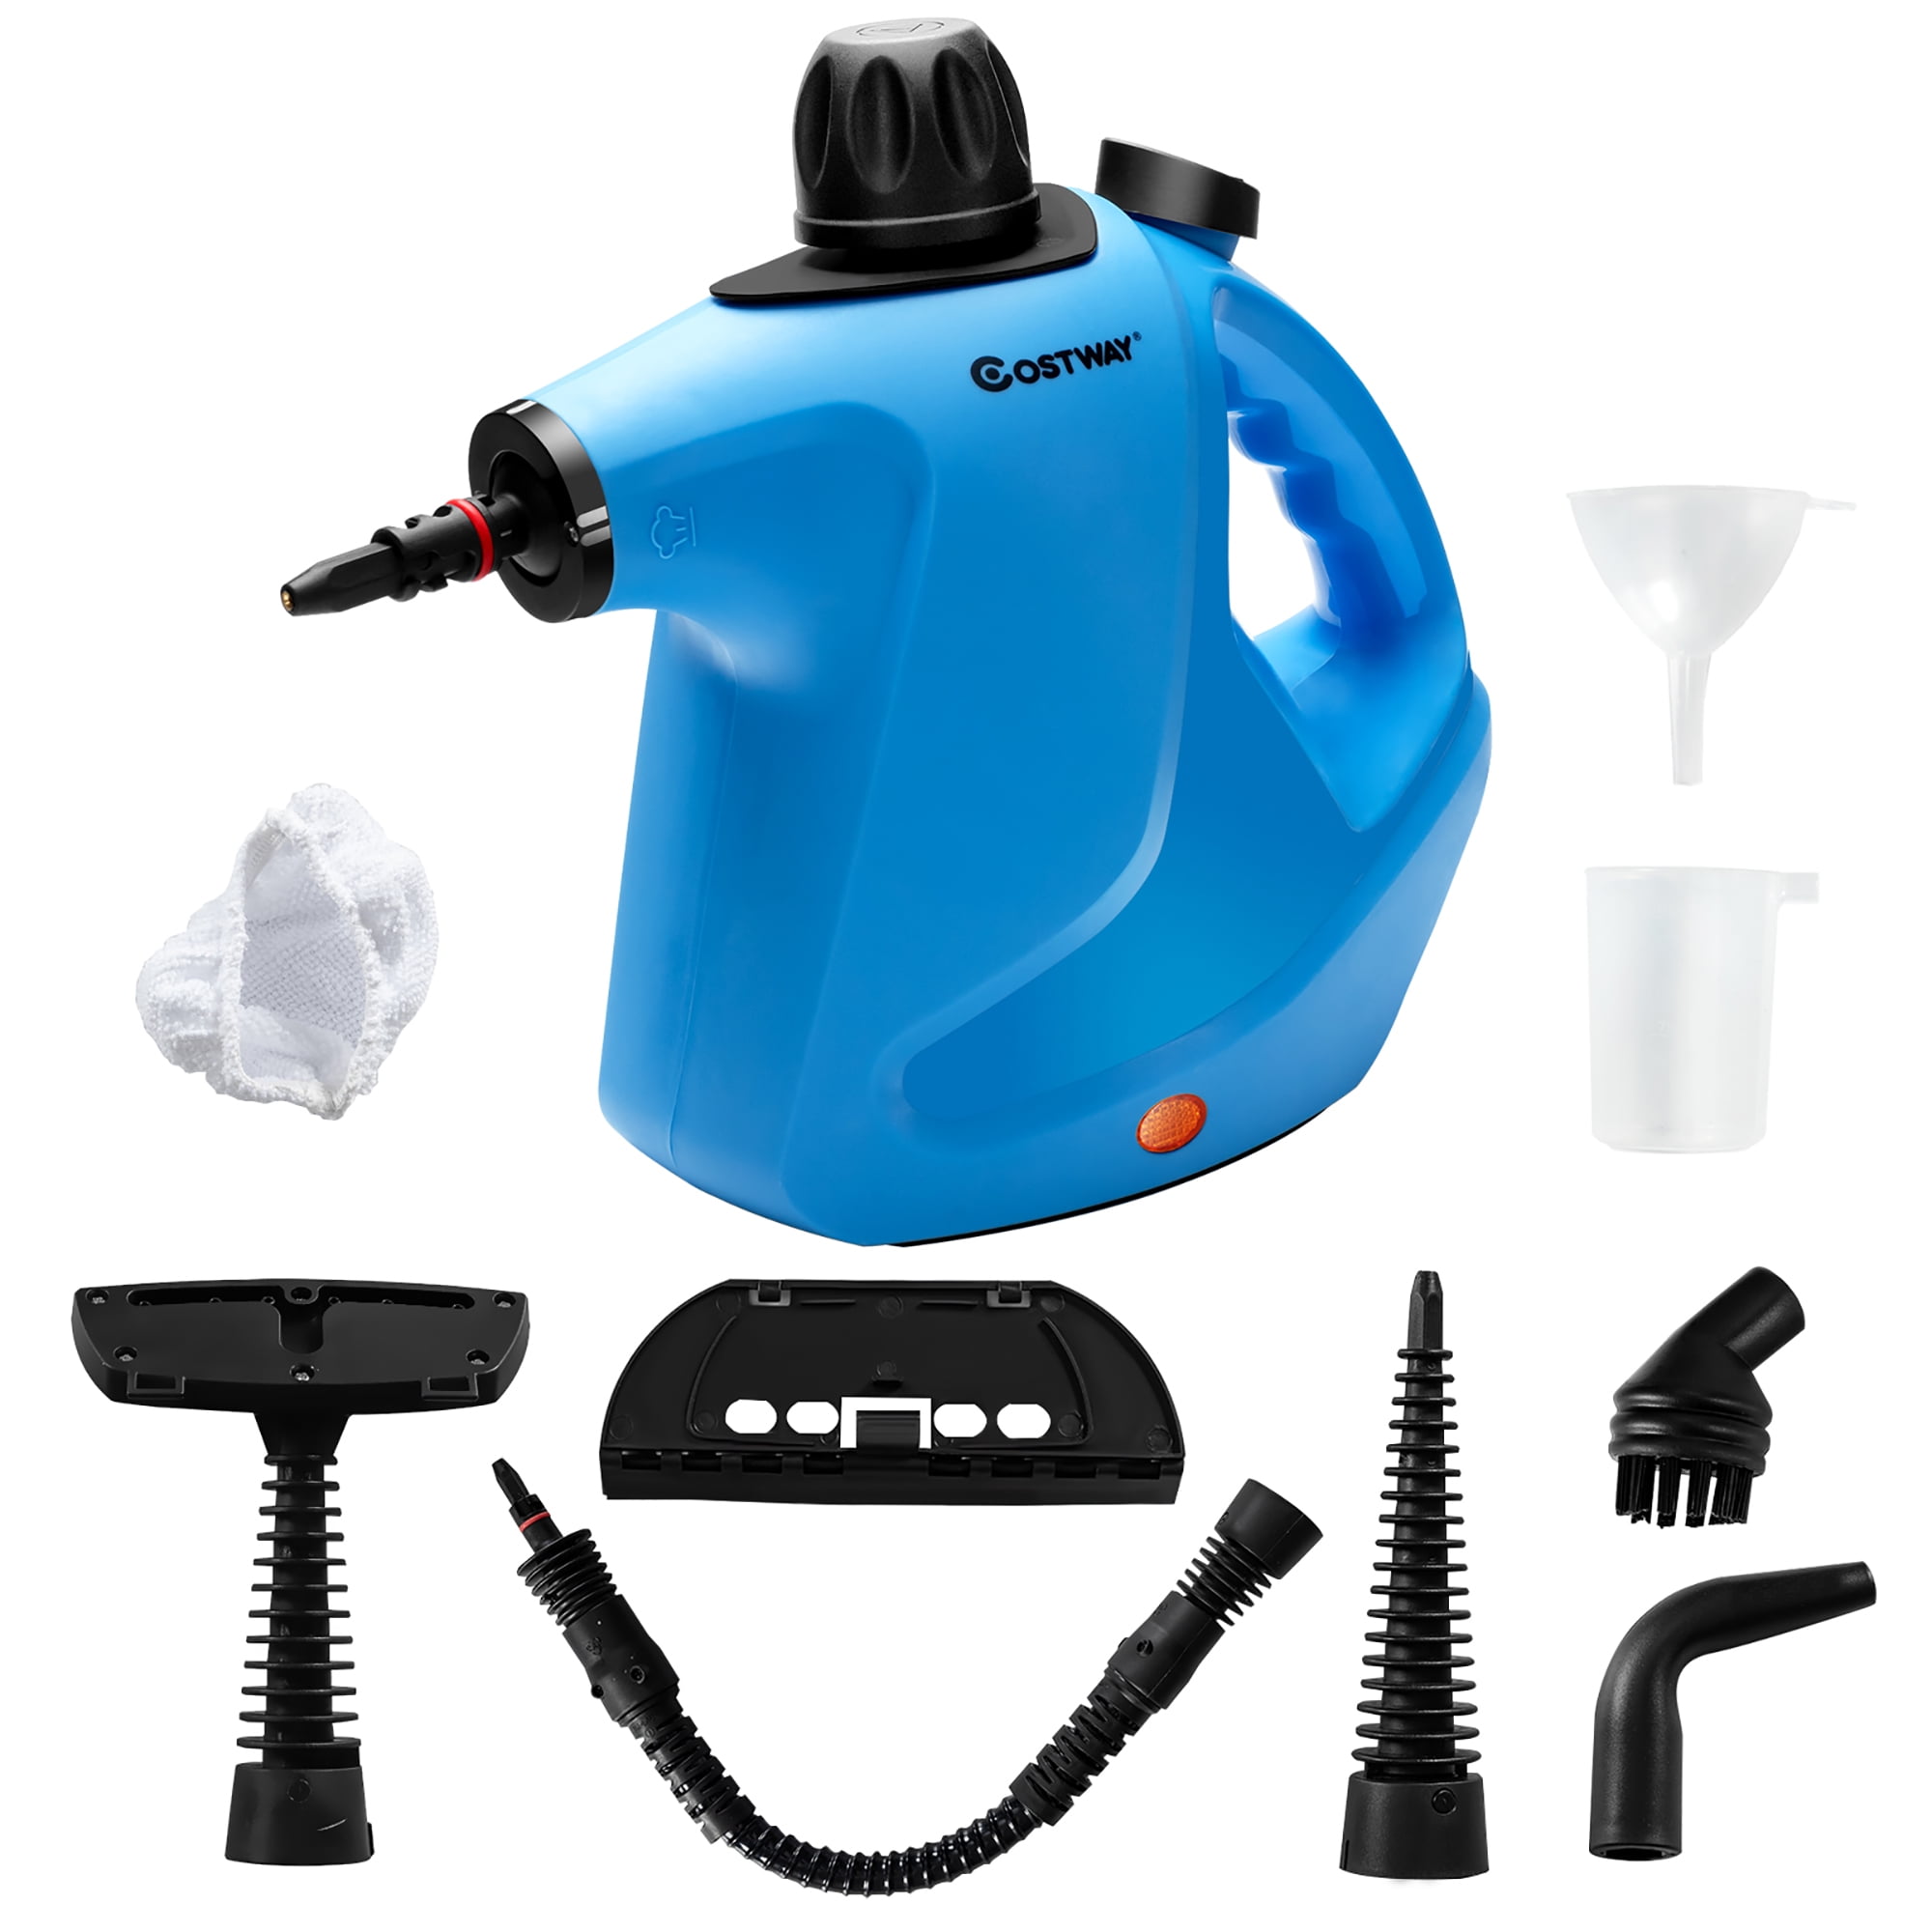 Details about   Multi Purpose Handheld Steam Cleaner 1050W Portable Steamer W/ Attachments House 